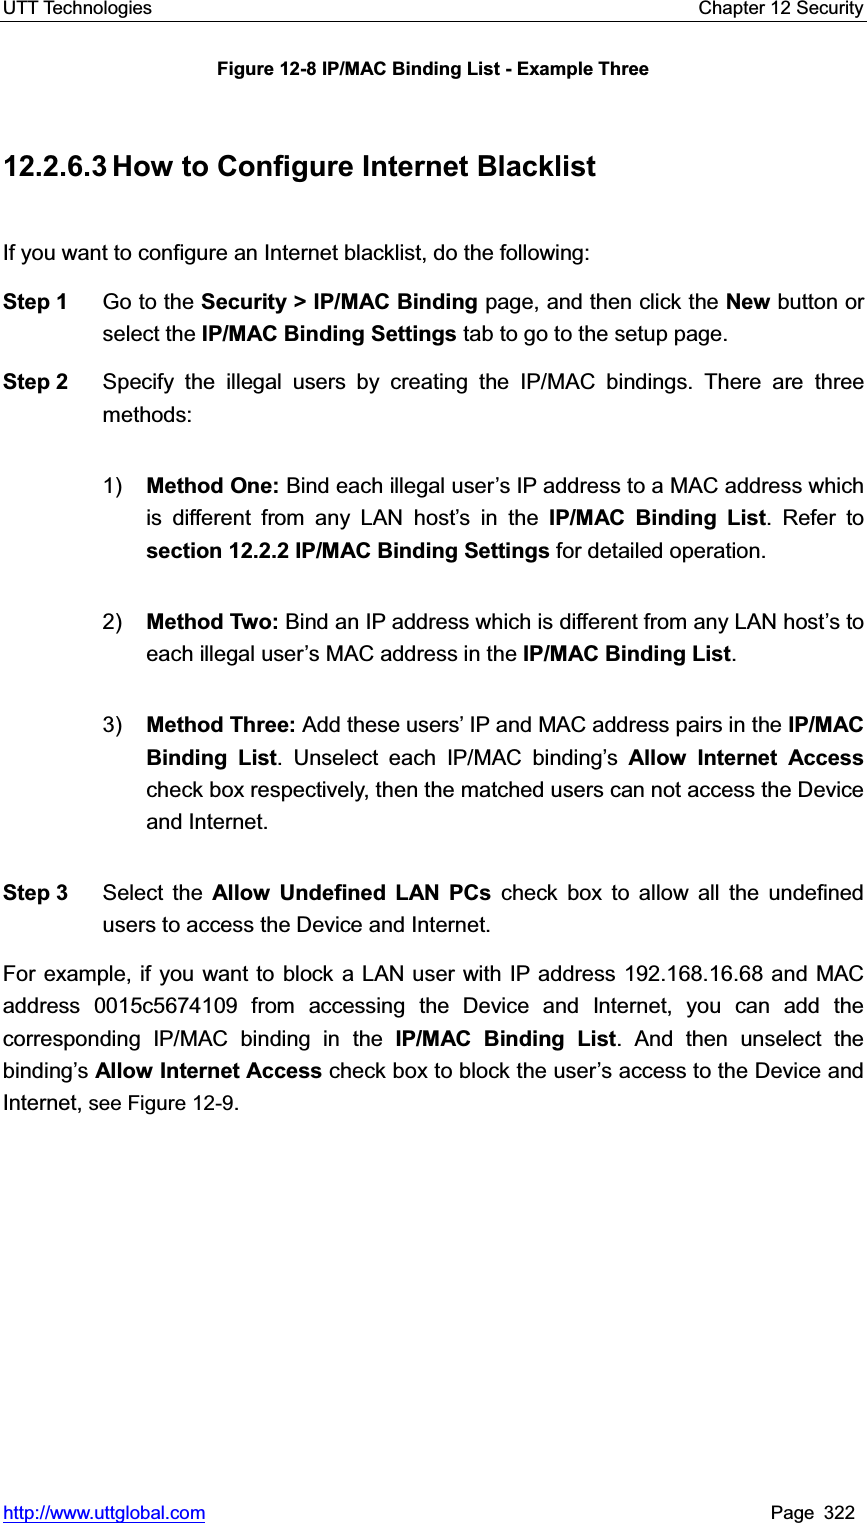 UTT Technologies    Chapter 12 Security   http://www.uttglobal.com Page 322 Figure 12-8 IP/MAC Binding List - Example Three 12.2.6.3 How to Configure Internet Blacklist If you want to configure an Internet blacklist, do the following:   Step 1  Go to the Security &gt; IP/MAC Binding page, and then click the New button or select the IP/MAC Binding Settings tab to go to the setup page. Step 2  Specify the illegal users by creating the IP/MAC bindings. There are three methods: 1) Method One: Bind each illegal user¶s IP address to a MAC address which is different from any LAN host¶s in the IP/MAC Binding List. Refer to section 12.2.2 IP/MAC Binding Settings for detailed operation. 2) Method Two: Bind an IP address which is different from any LAN host¶s to each illegal user¶s MAC address in the IP/MAC Binding List.3) Method Three: Add these users¶ IP and MAC address pairs in the IP/MAC Binding List. Unselect each IP/MAC binding¶s Allow Internet Accesscheck box respectively, then the matched users can not access the Device and Internet.   Step 3  Select the Allow Undefined LAN PCs check box to allow all the undefined users to access the Device and Internet. For example, if you want to block a LAN user with IP address 192.168.16.68 and MAC address 0015c5674109 from accessing the Device and Internet, you can add the corresponding IP/MAC binding in the IP/MAC Binding List. And then unselect the binding¶sAllow Internet Access check box to block the user¶s access to the Device and Internet, see Figure 12-9.